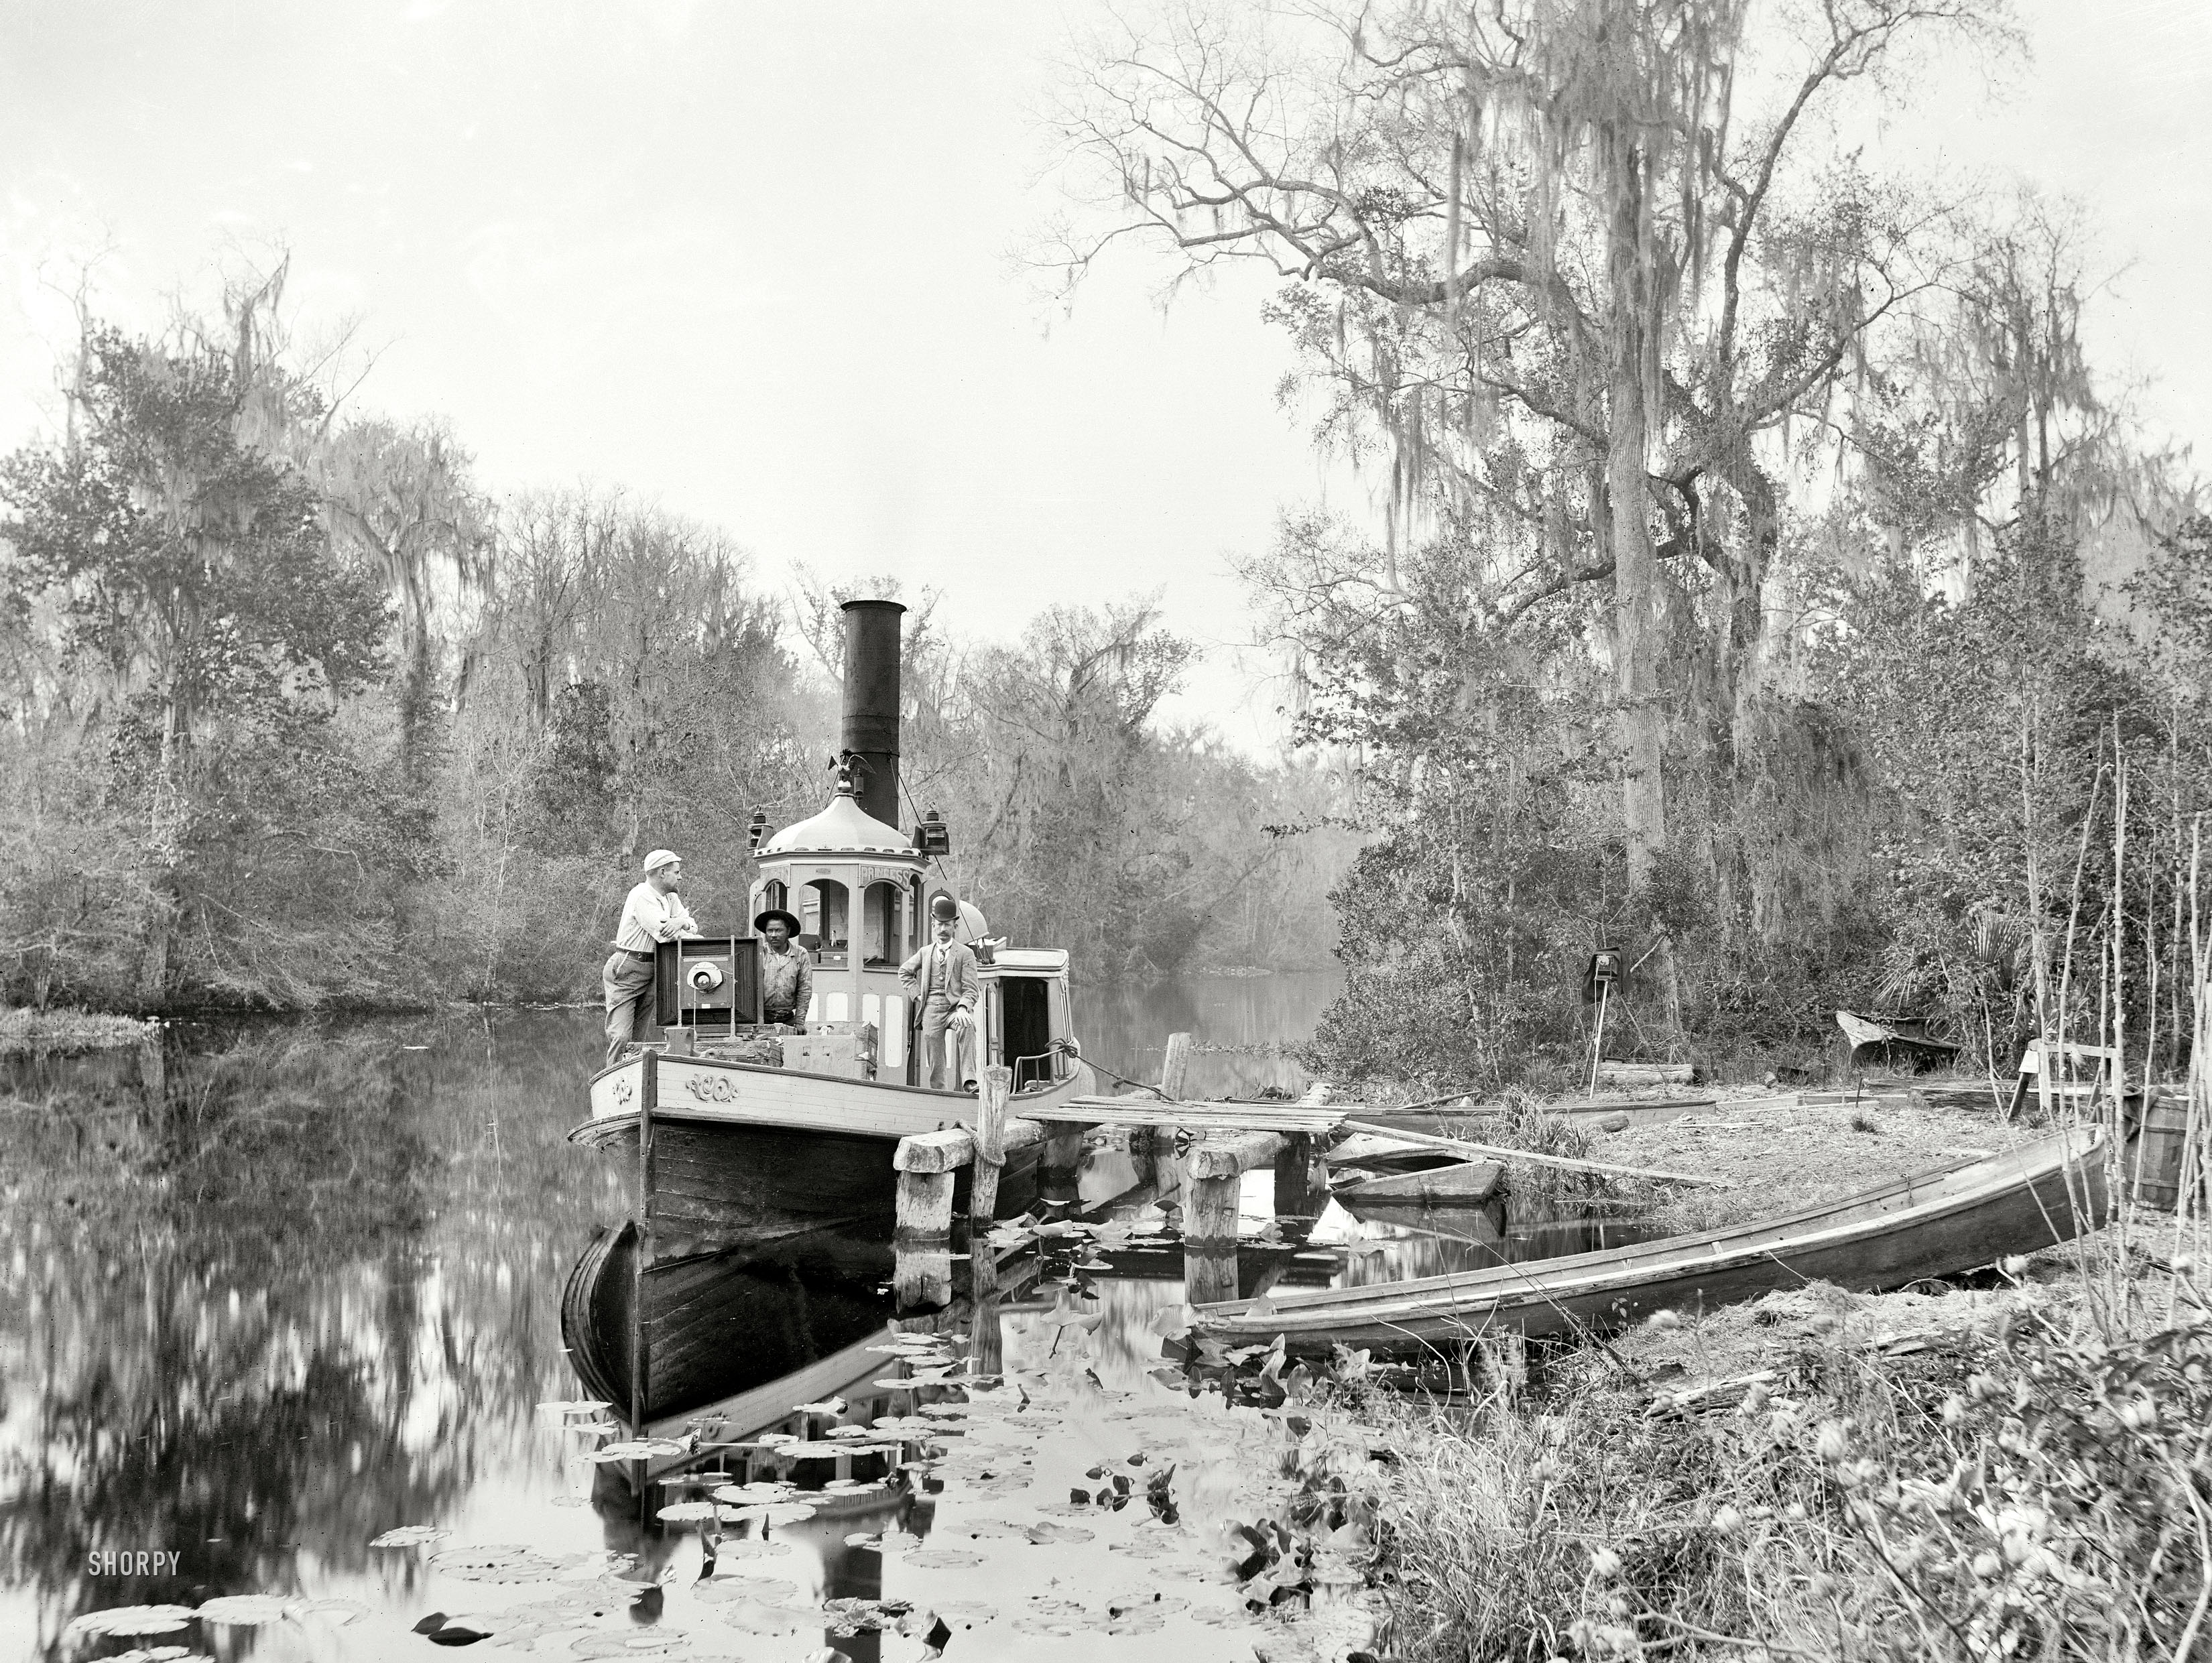 Florida in the 1890s. "Brown's Landing, Rice Creek." Note the enormous 18x22 inch "mammoth plate" view camera set up on the bow of the Princess. 8x10 inch glass negative by William Henry Jackson, whose photographs formed the basis of Detroit Publishing's holdings in the company's early days. View full size.